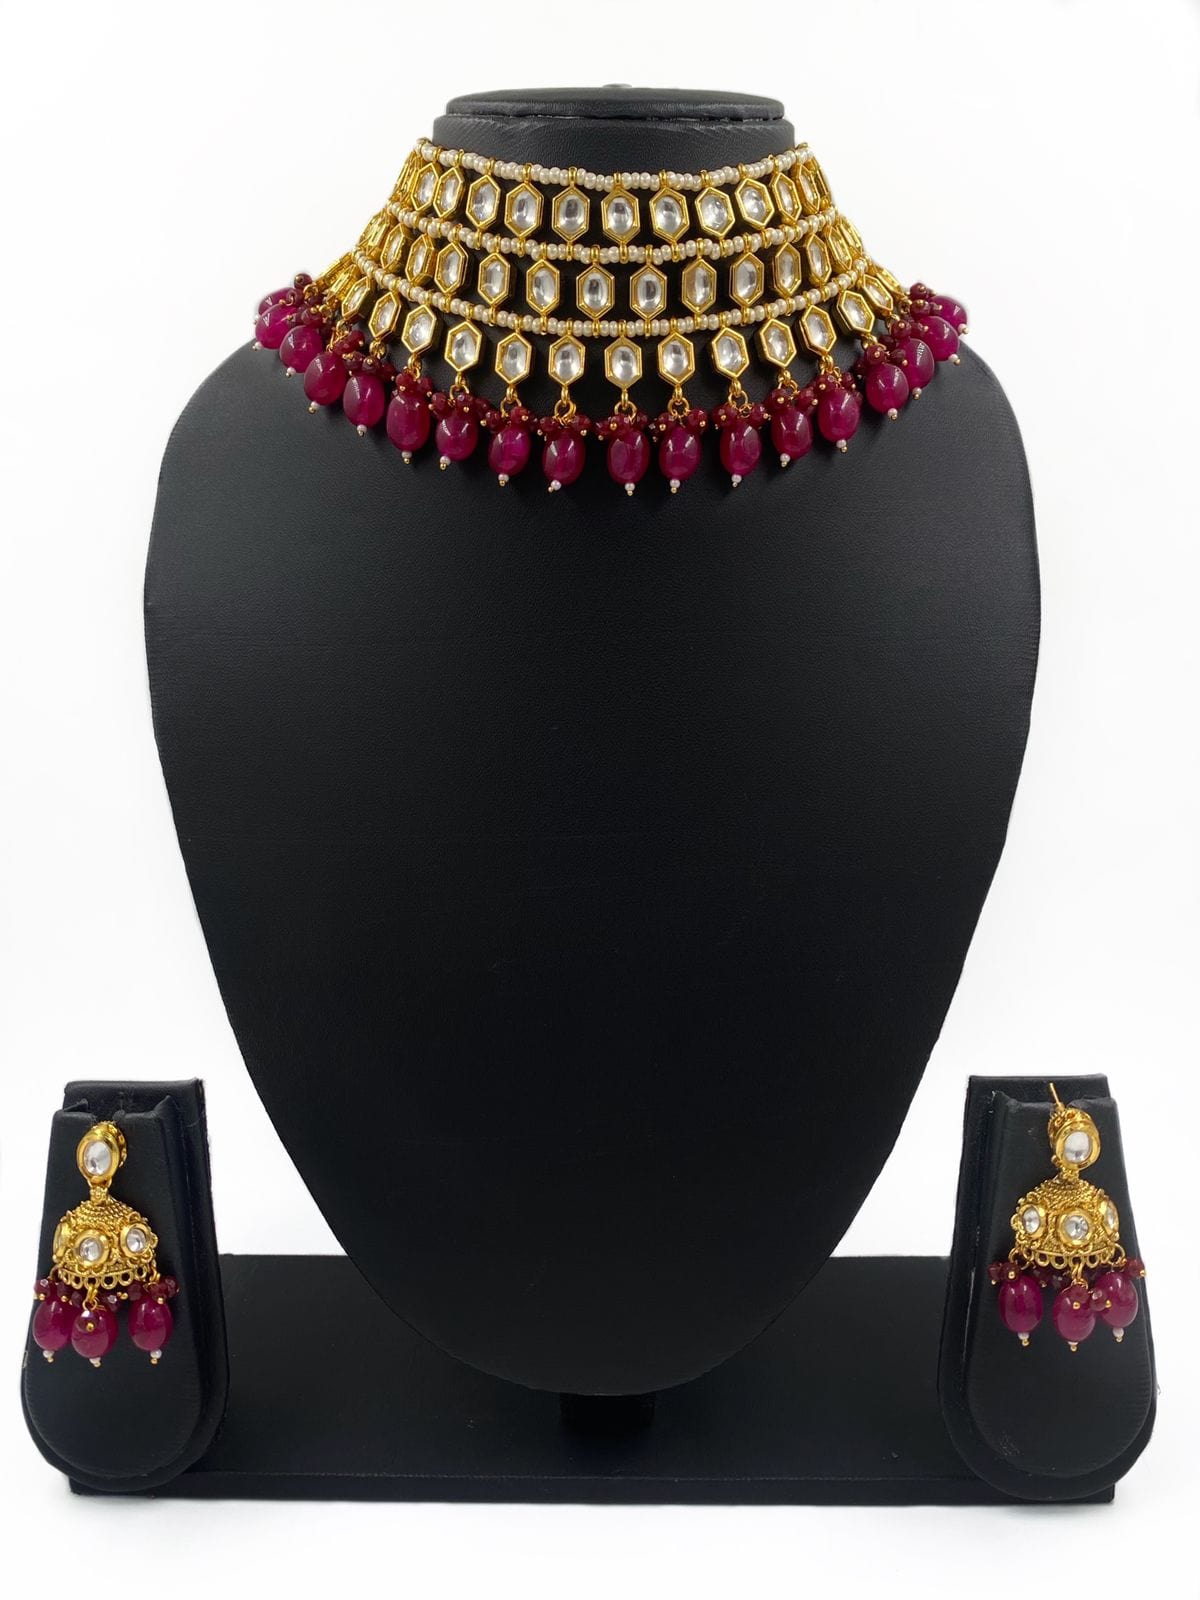 Traditional Kundan And Pearl Choker Necklace Set For Women By Gehna Shop Choker Necklace Set